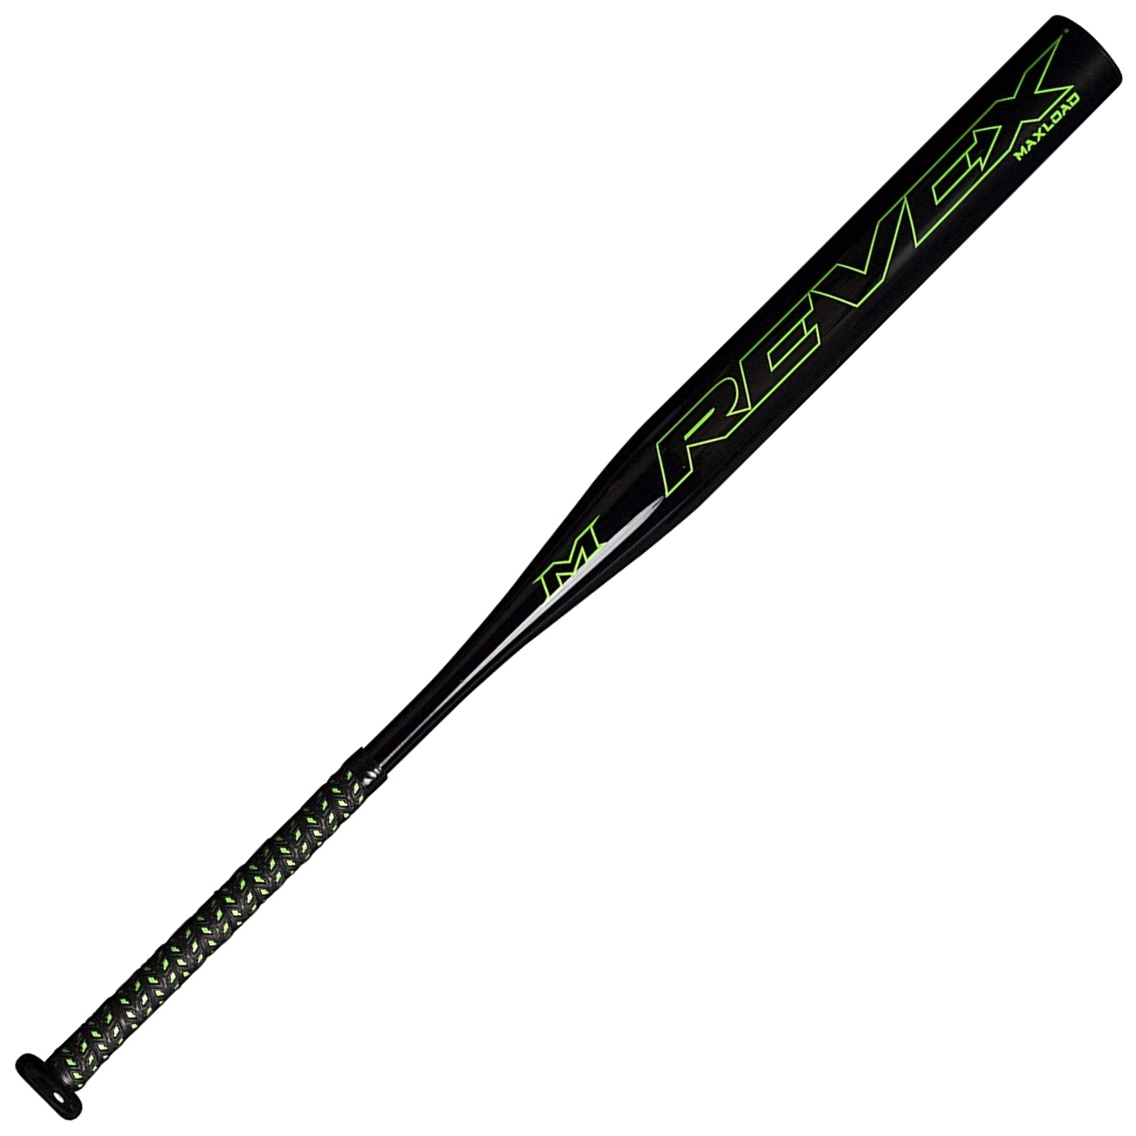 The Miken 2021 Rev-Ex Maxload all association bat delivers a solid performance, fully composite one-piece bat approved for most associations for the ultimate bang for your buck. It utilizes a player preferred 0.5 oz maxload weighting to deliver more mass through the zone, providing more pop at the plate. Start dominating, order today! Made in U.S.A.  Size:   2 1/4 in  Certification:   ASA, USSSA, NSA, ISA, ISF, All Association, USA  Frame:   One-Piece  Technology:   750X HPI  Series:   Rev-Ex  Warranty:   1 Year  Barrel Length:   14 in  Year Released:   2021 